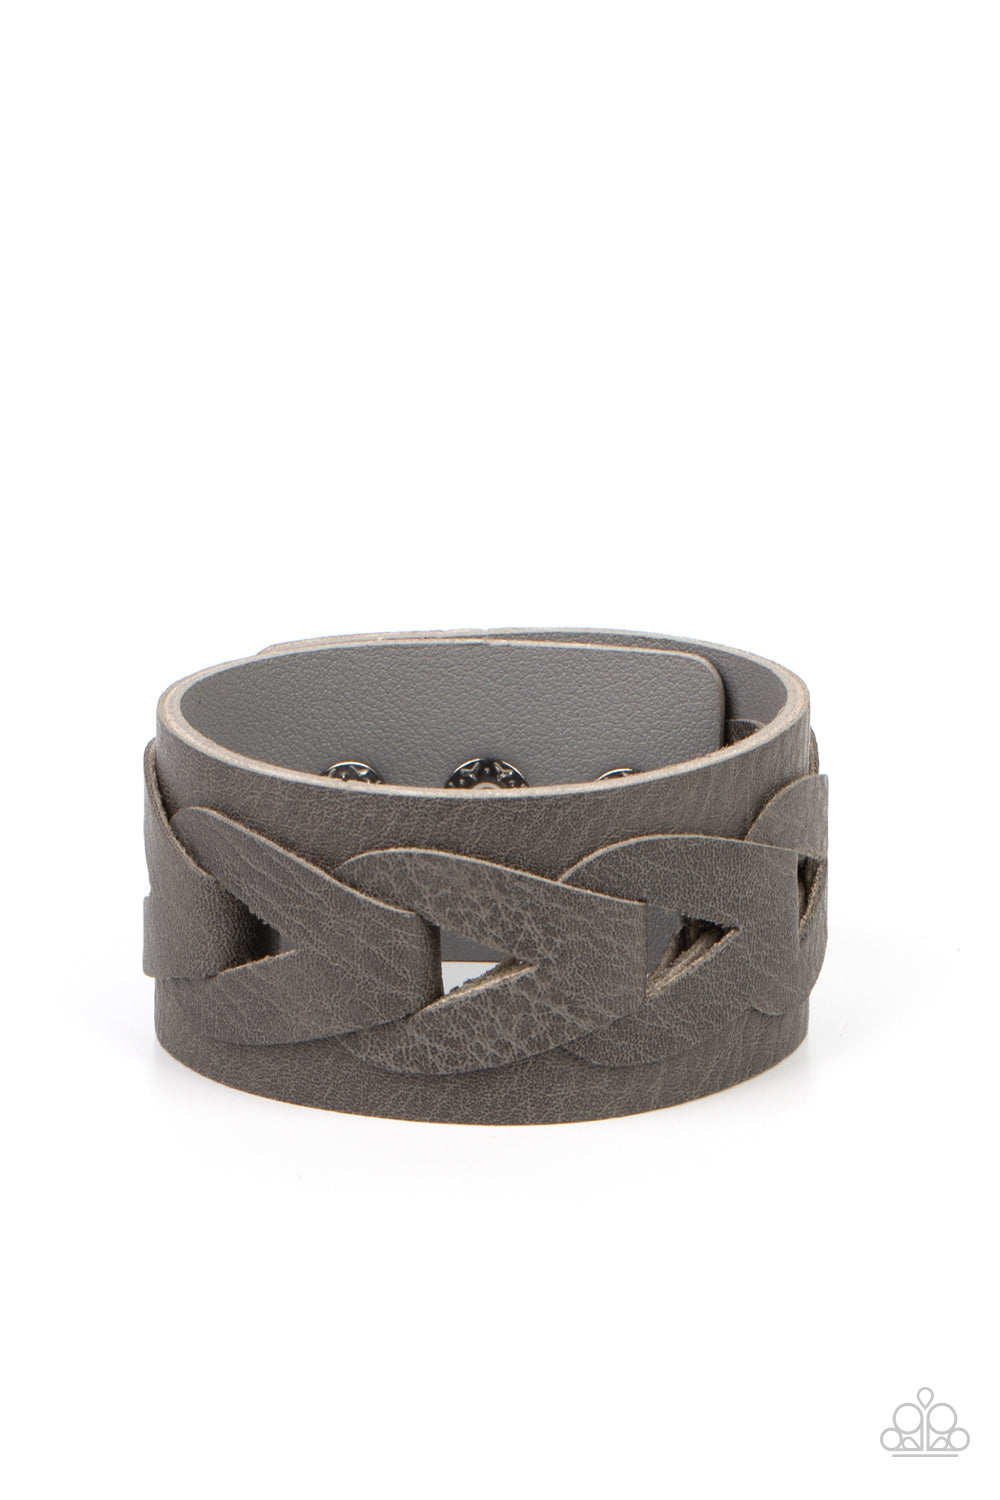 Horse and Carriage - Silver/Gray Leather Paparazzi Men's Snap Bracelet